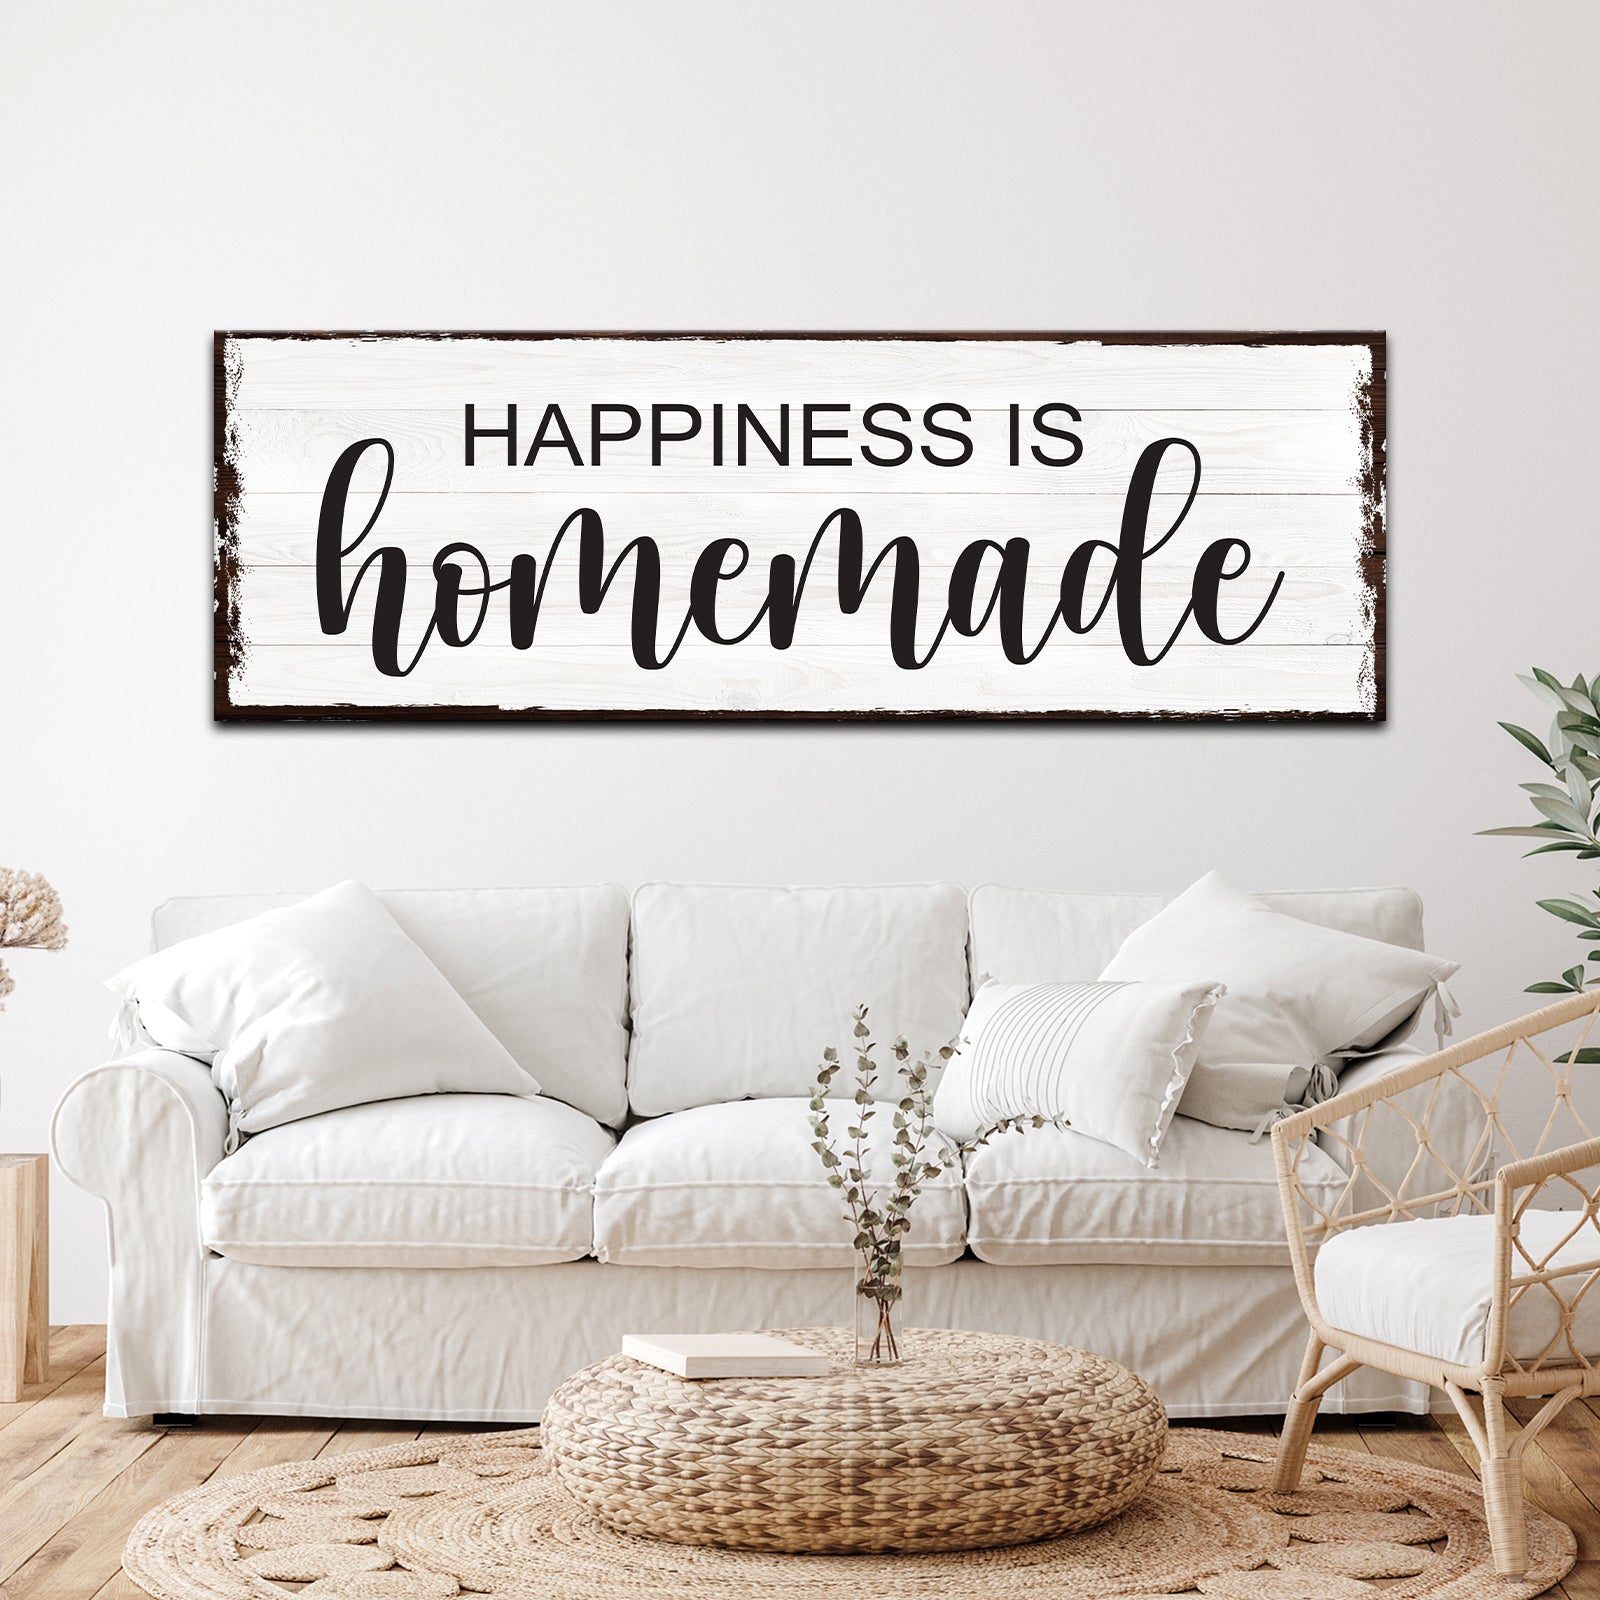 Happiness is Homemade Sign III - Image by Tailored Canvases